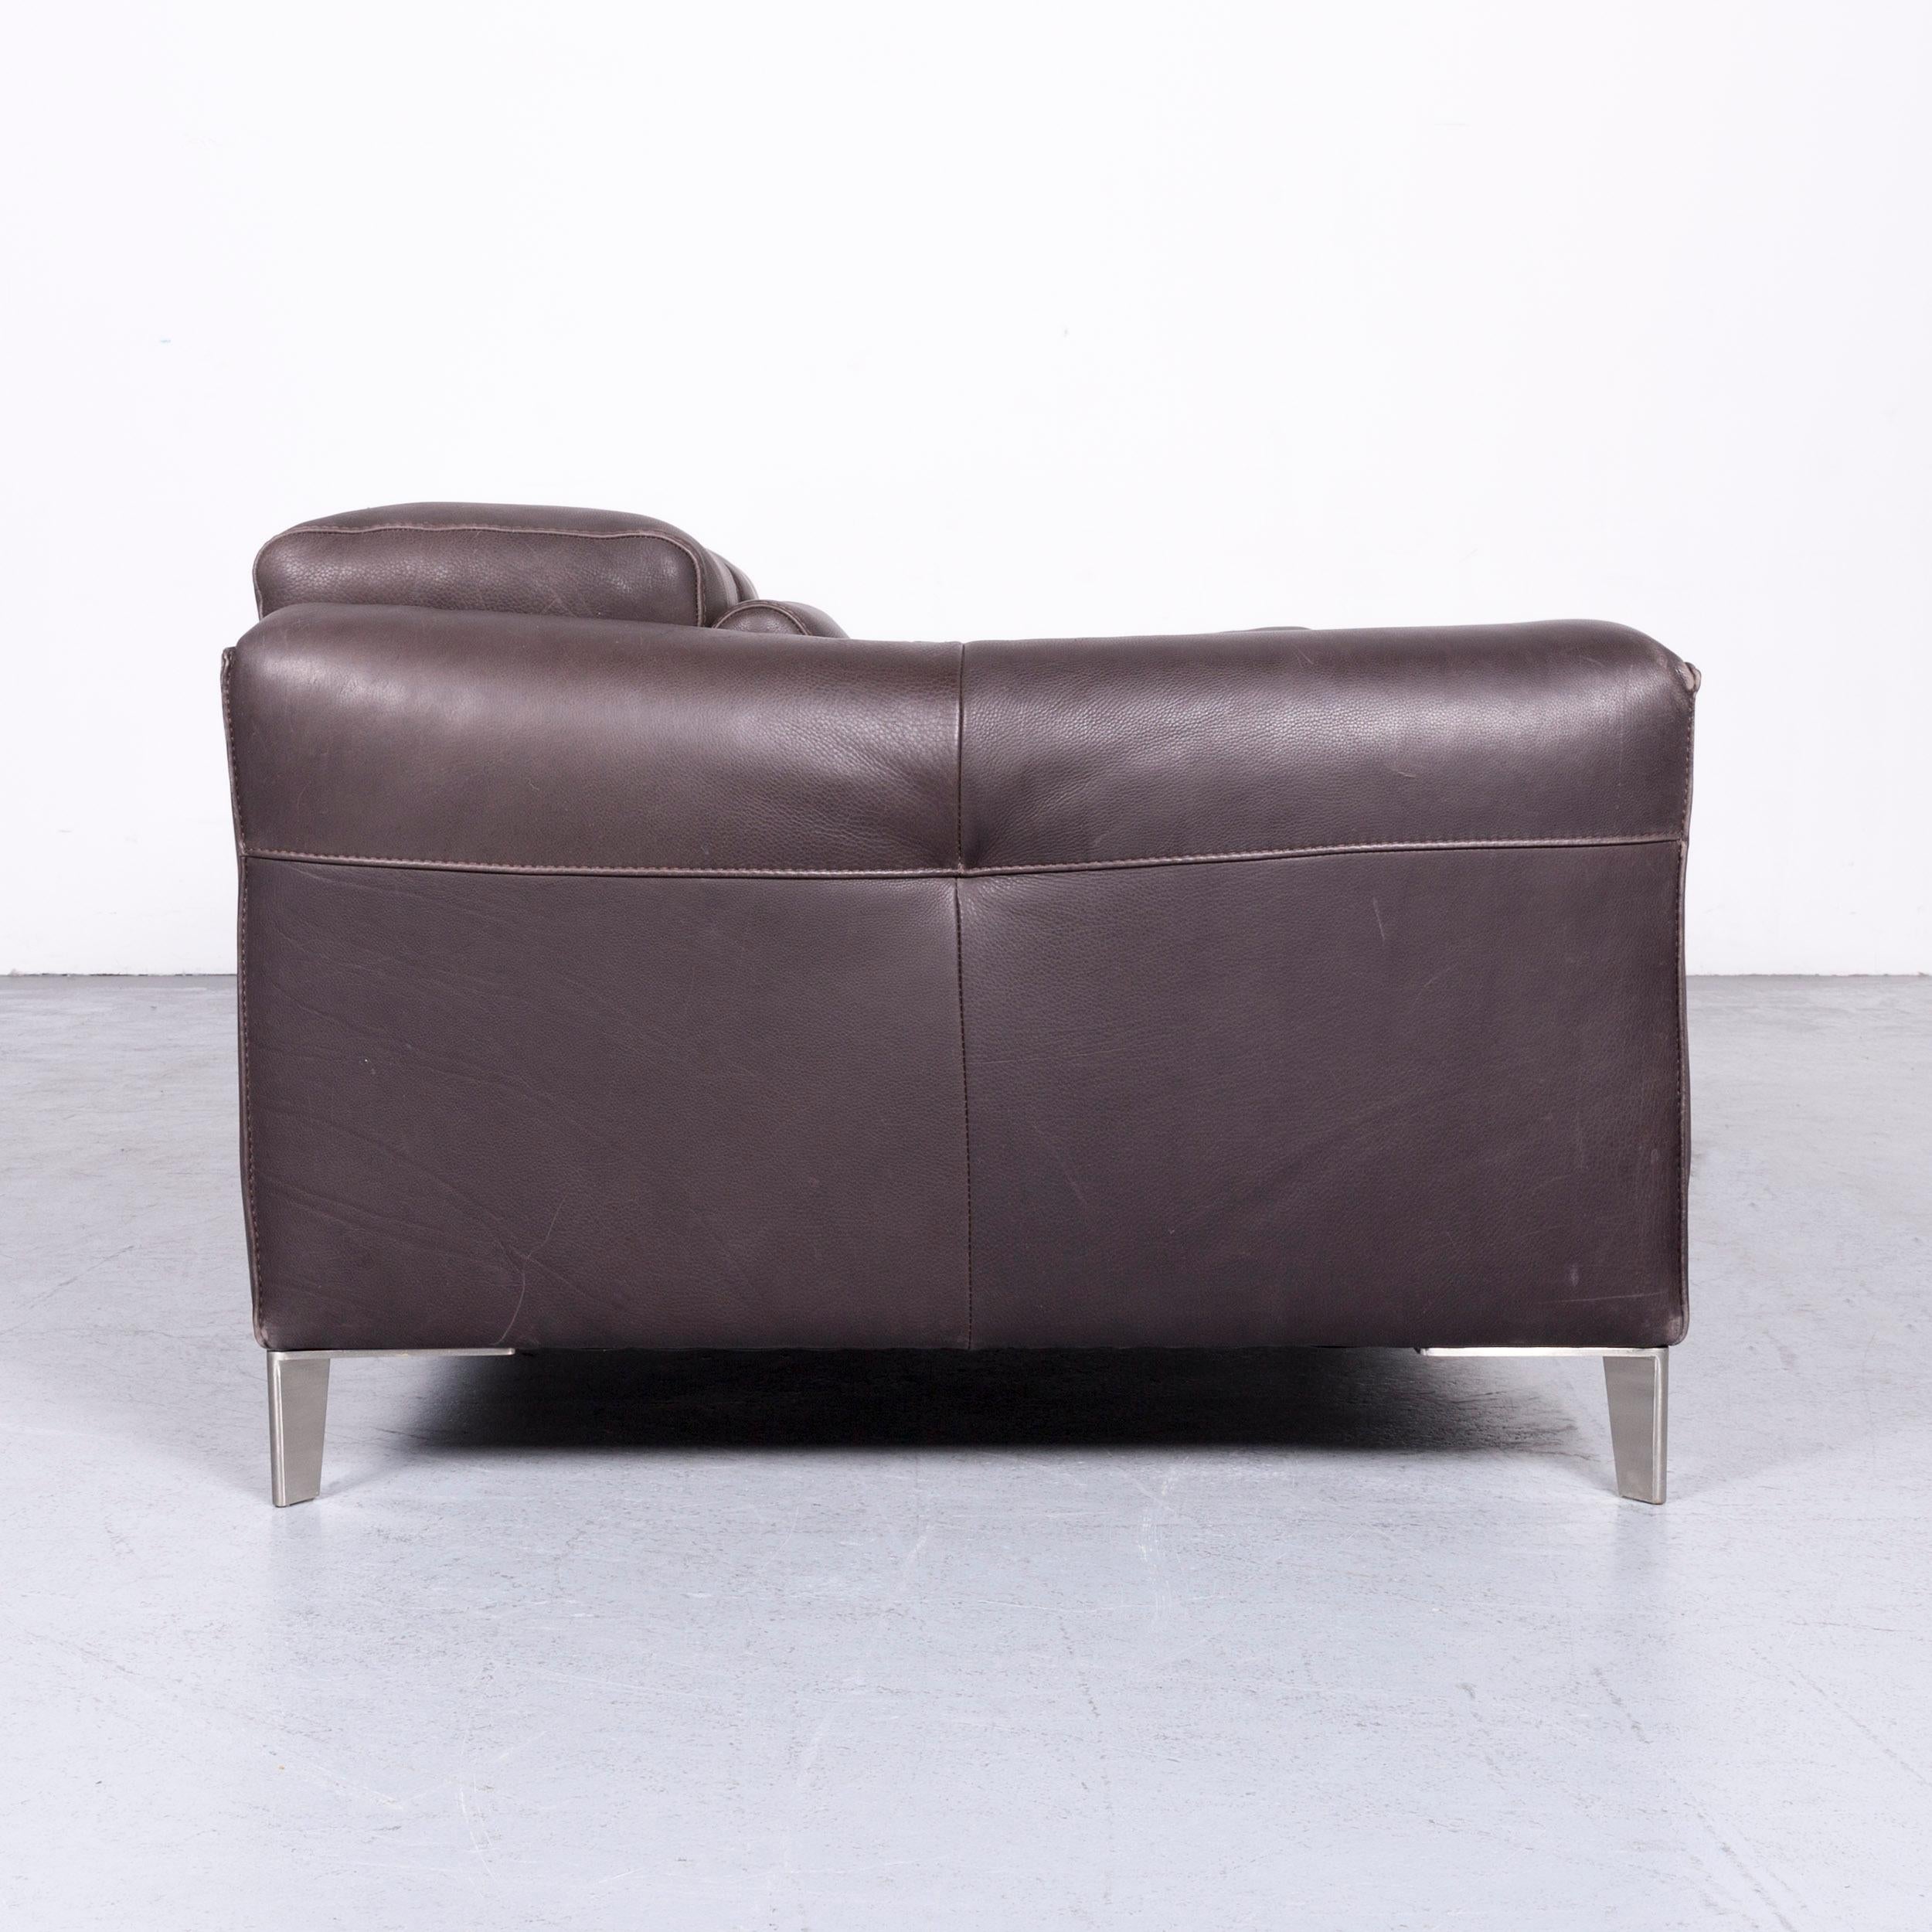 Natuzzi Designer Leather Sofa Two-Seat Couch Brown 4